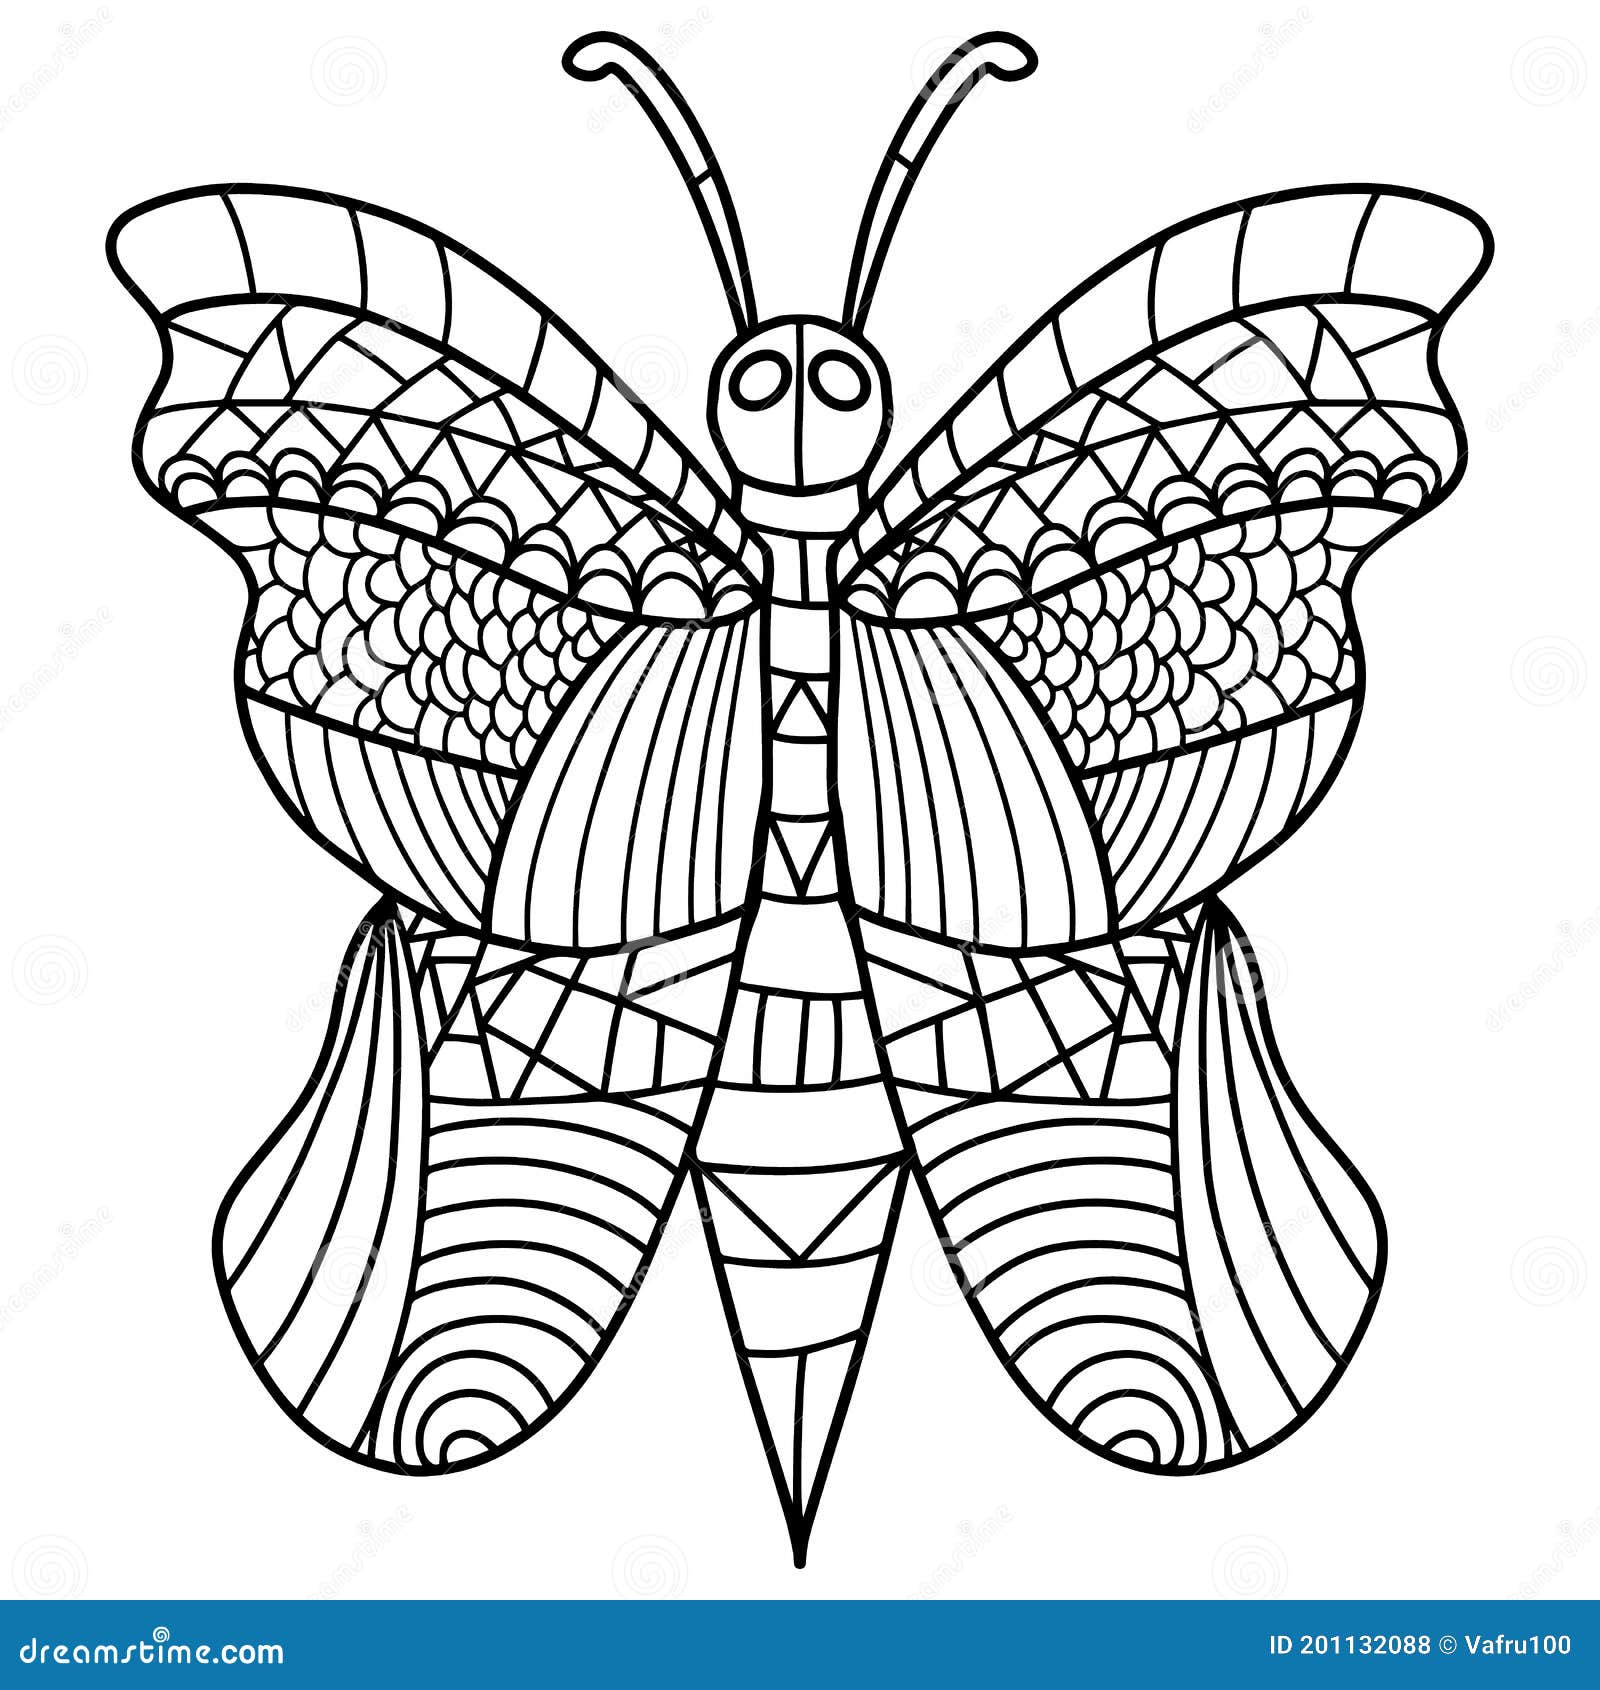 Coloring Antistress in the Stele of a Doodle. Butterfly Coloring Page ...